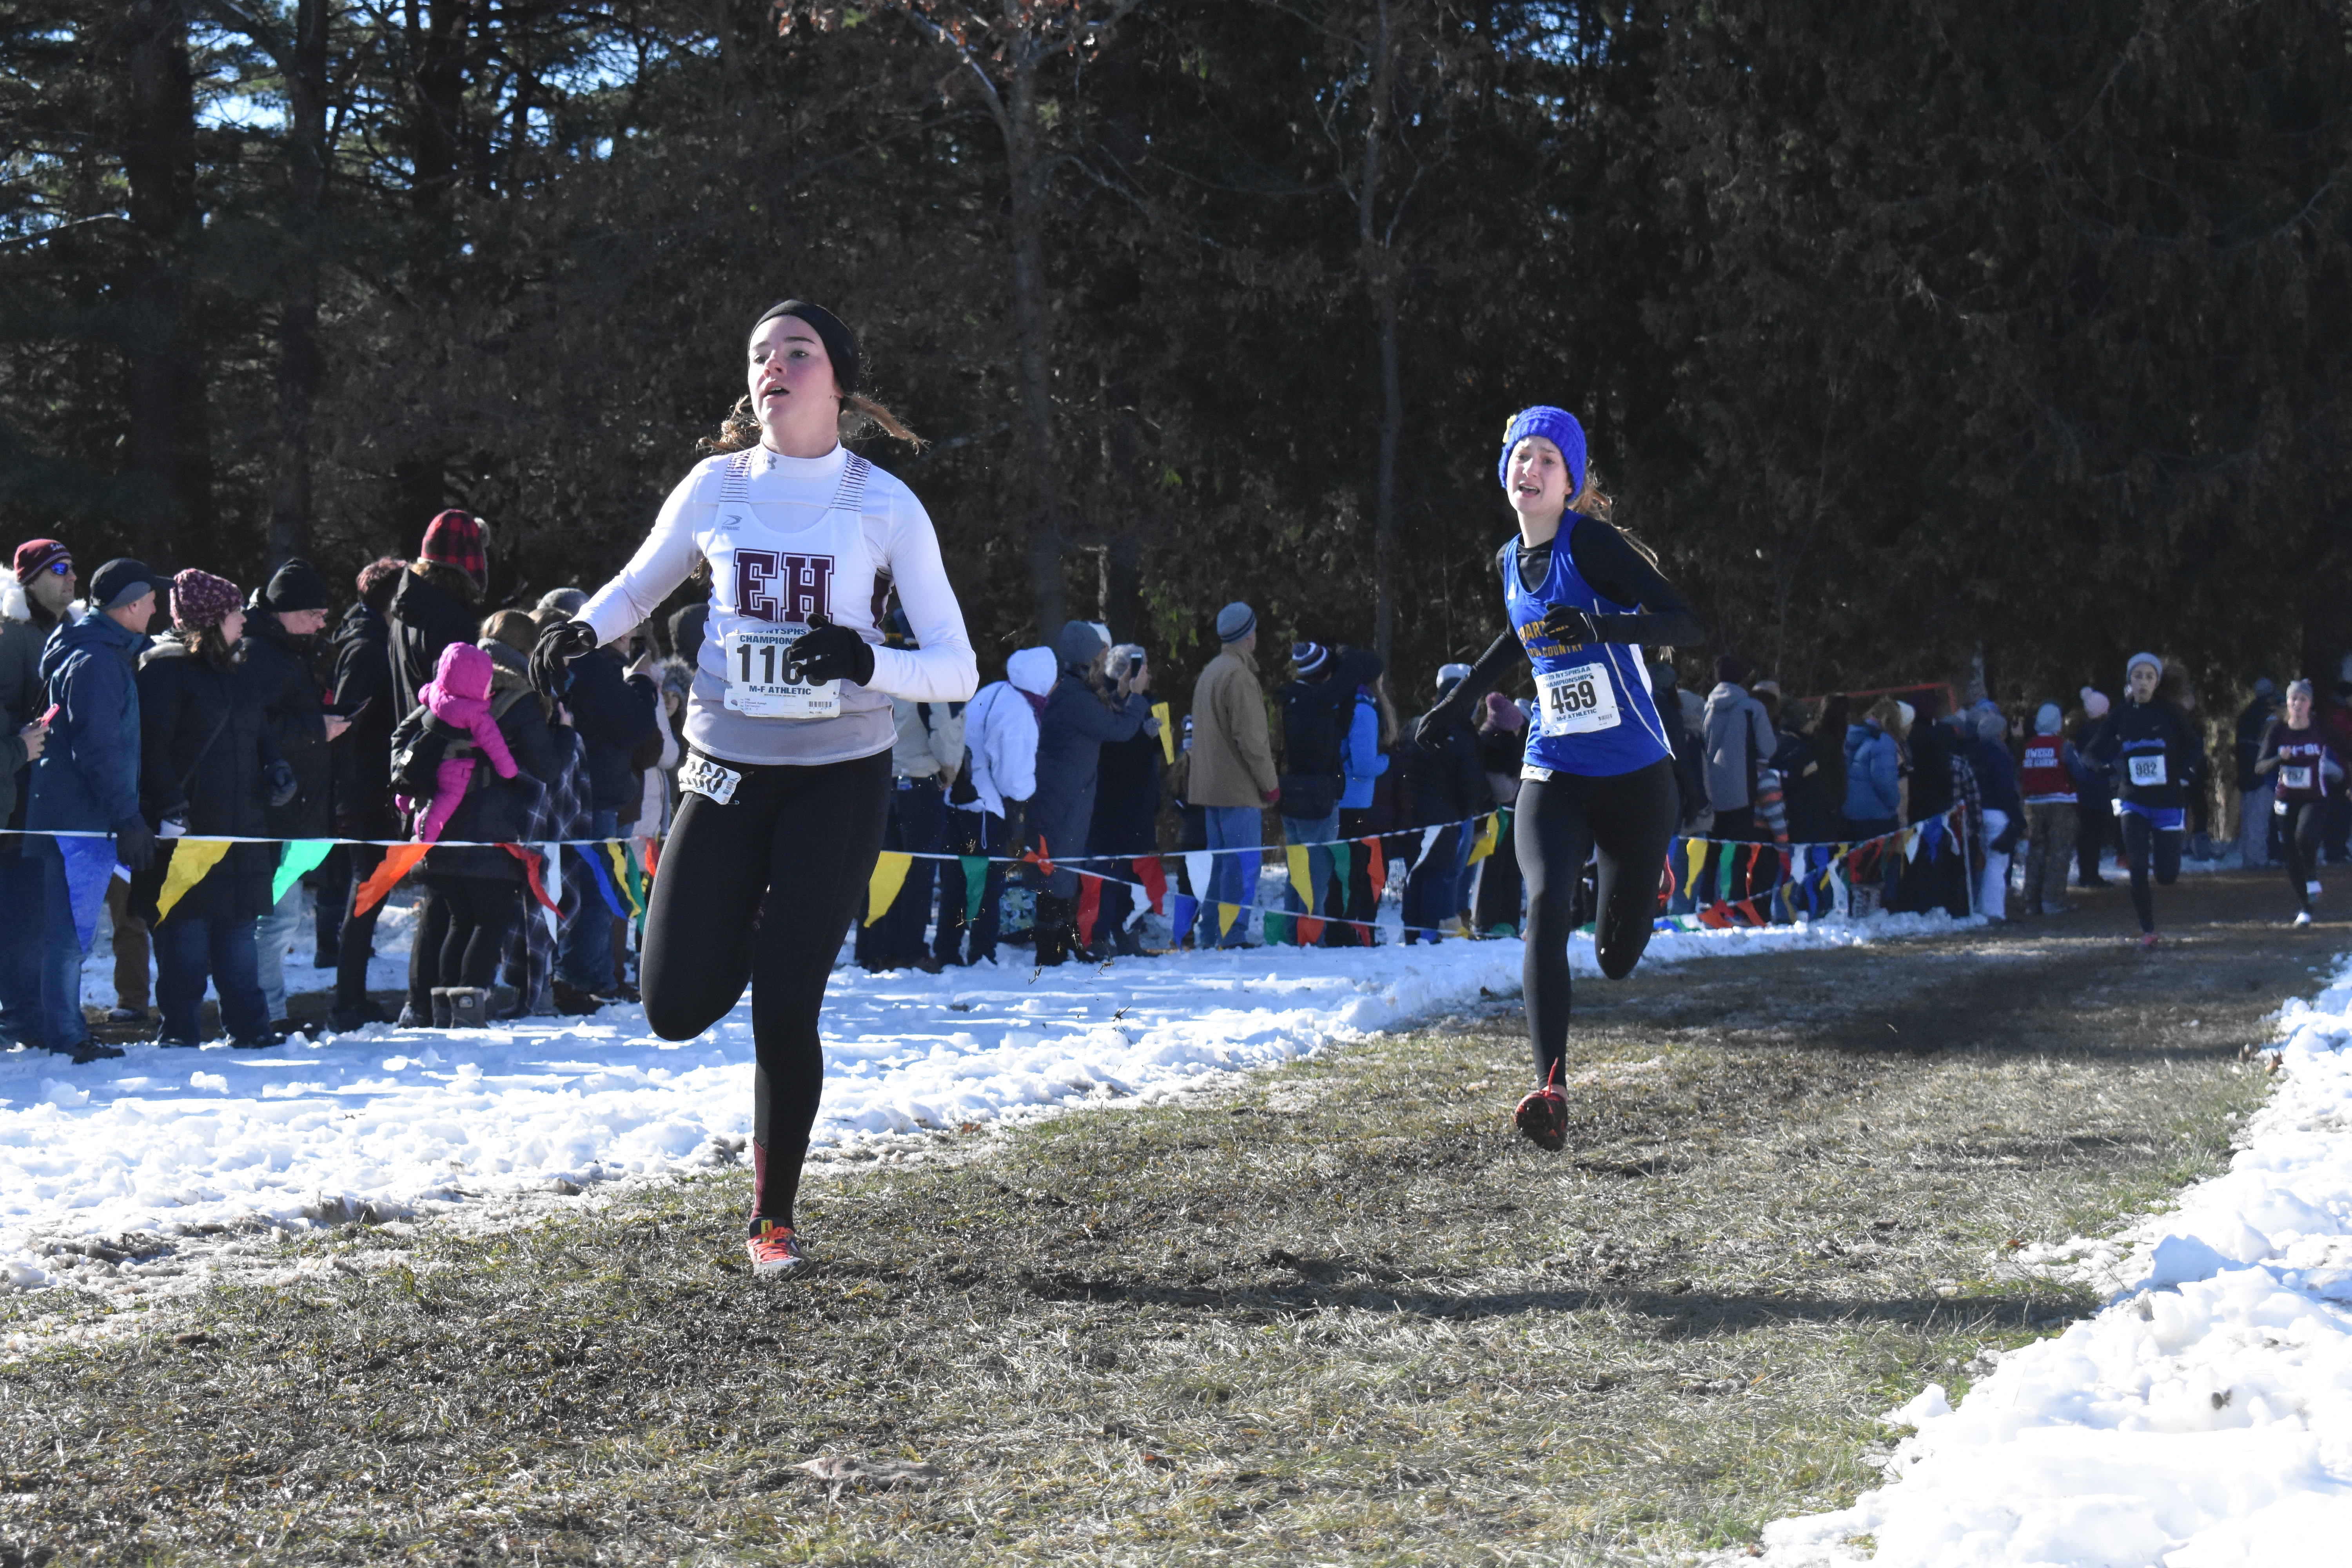 East Hampton's Ryleigh O'Donnell reaches the finish line.